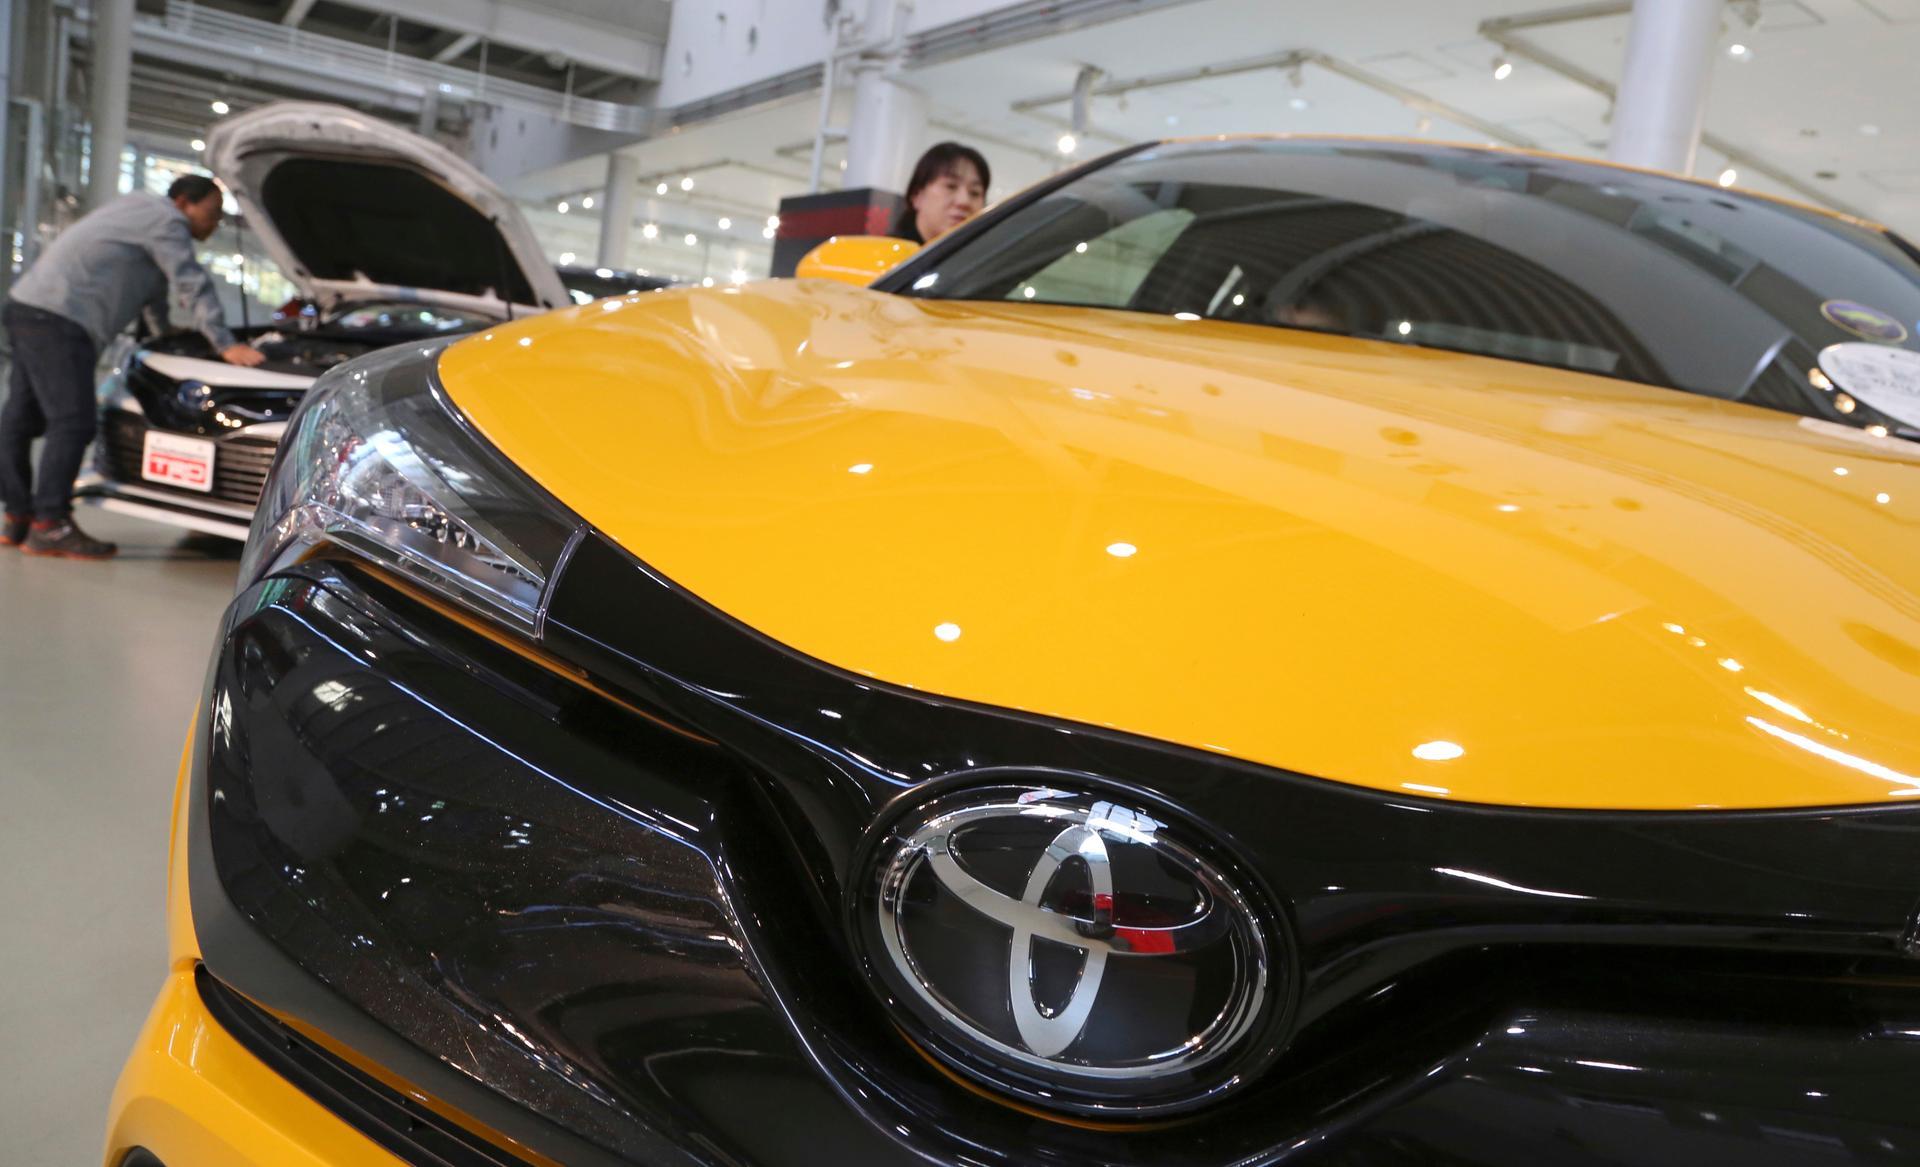 In this Nov. 13, 2017, photo, visitors take a look at Toyota cars at the automaker's showroom in Tokyo. Toyota Motor Corp. has raised its earnings forecast after reporting that its profit surged 28 percent in the last quarter on growing sales and cost cuts. The top Japanese automaker said Tuesday, Nov. 6, 2018, that its July-September profit was 585.1 billion yen ($5.2 billion), up from 458.3 billion yen the year before (AP Photo/Koji Sasahara)